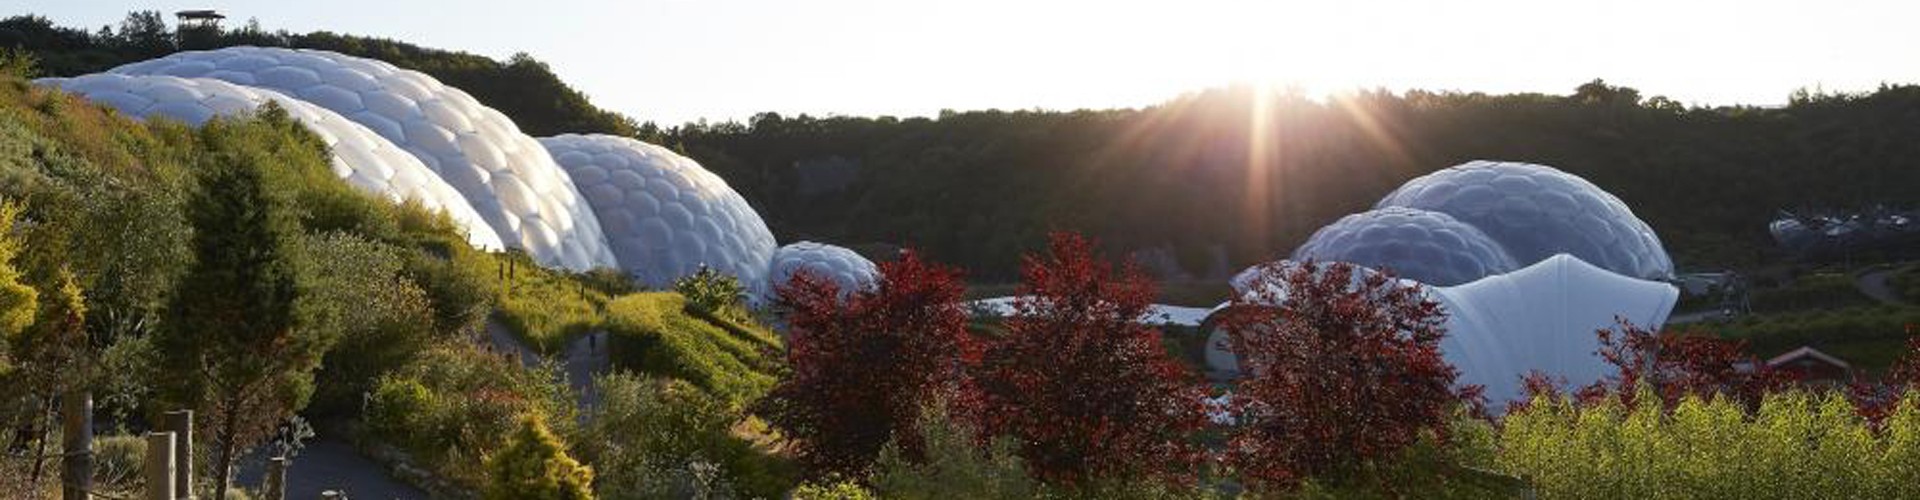 Eden Project biomes with sun shining low in the sky